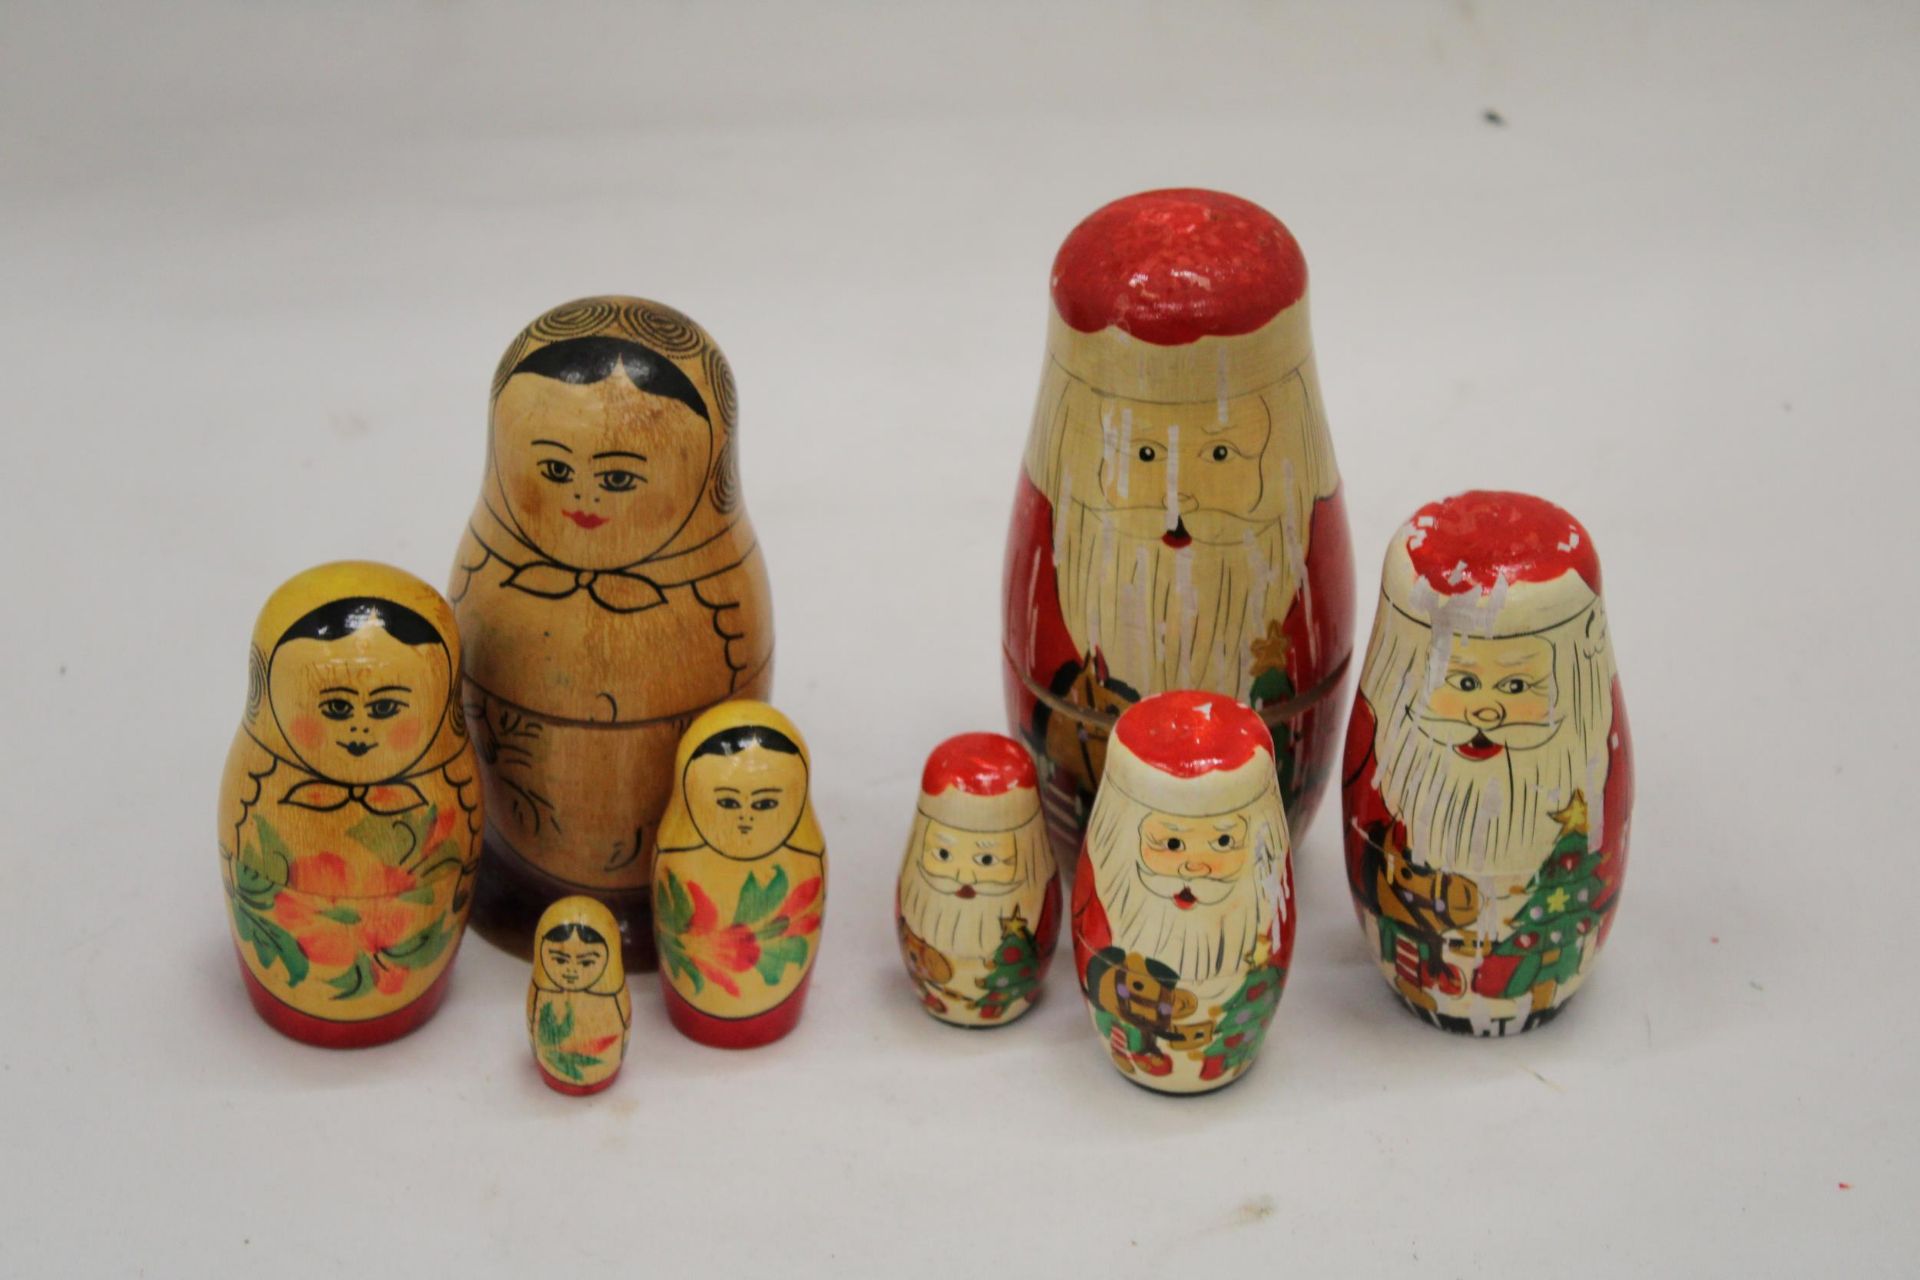 A RUSSIAN NESTING DOLL AND FATHER CHRISTMAS - Image 2 of 5